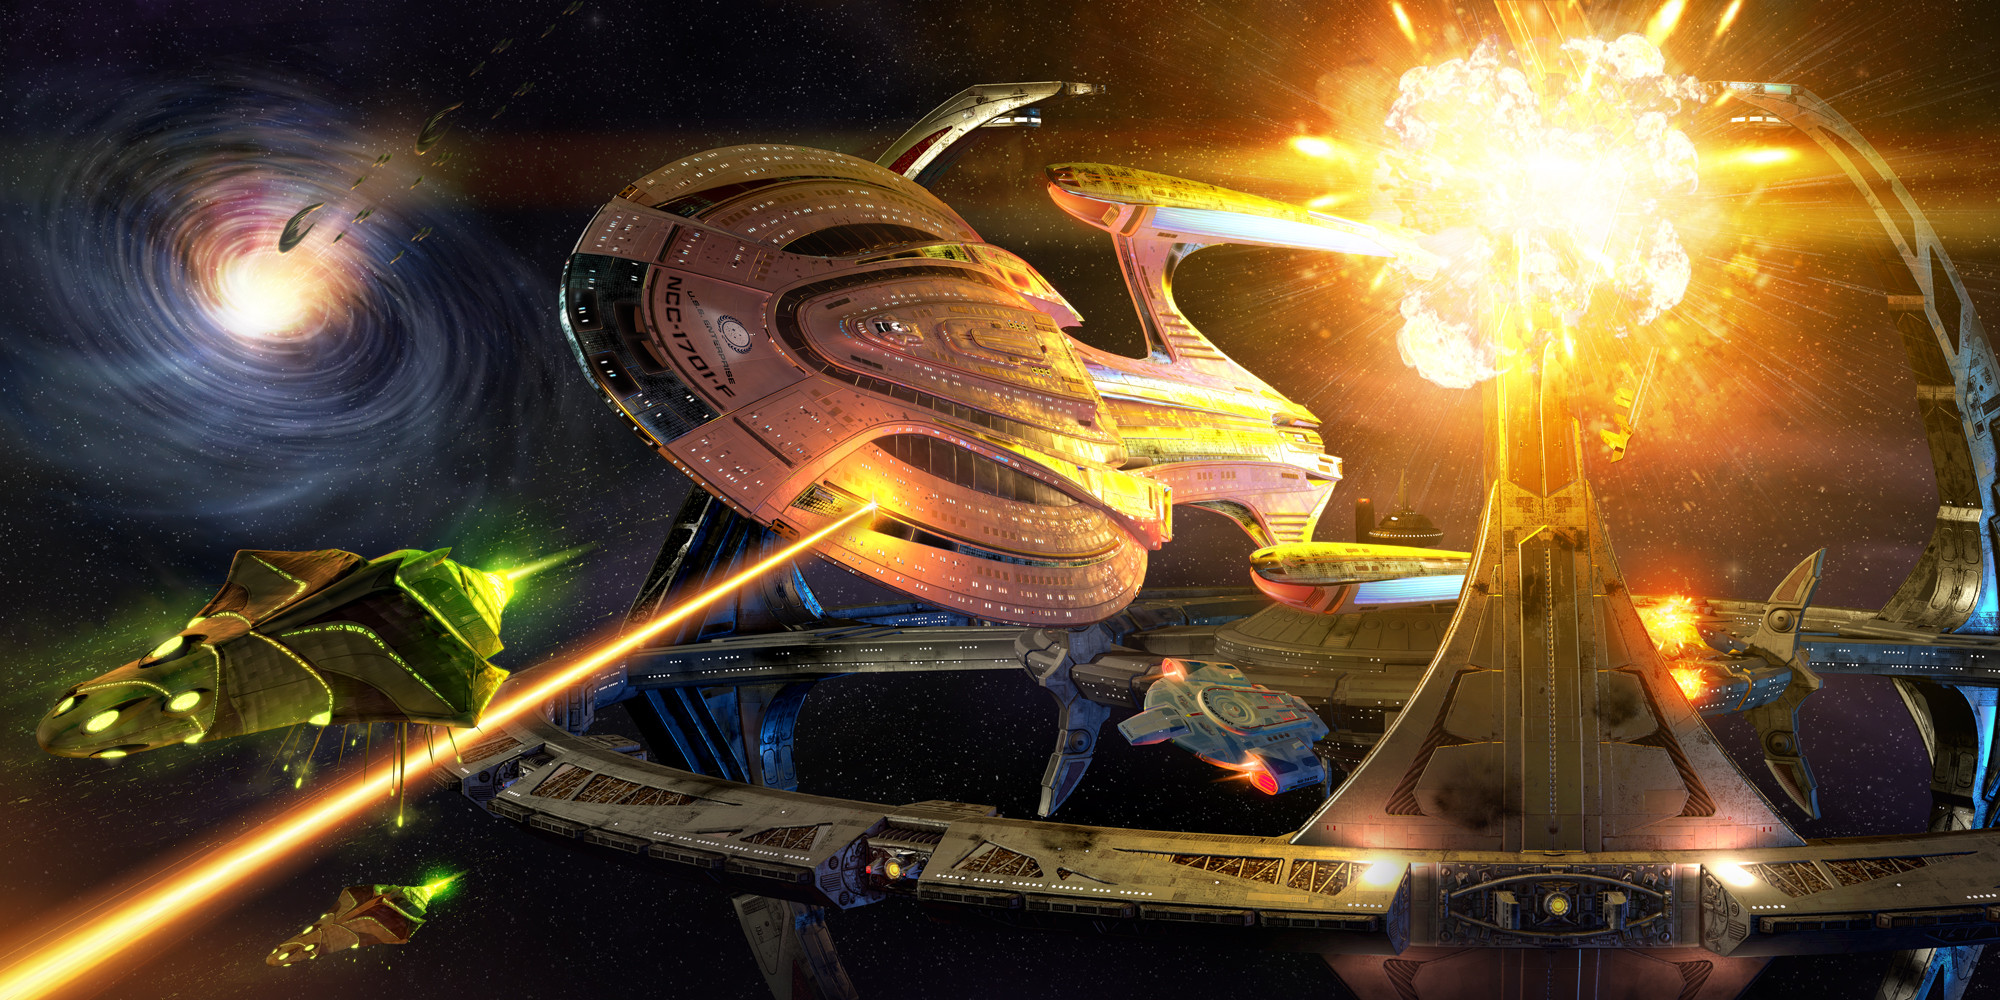 Marmoset render and photoshop composition done for the Star Trek: Ships of the Line 2022 wall calendar.